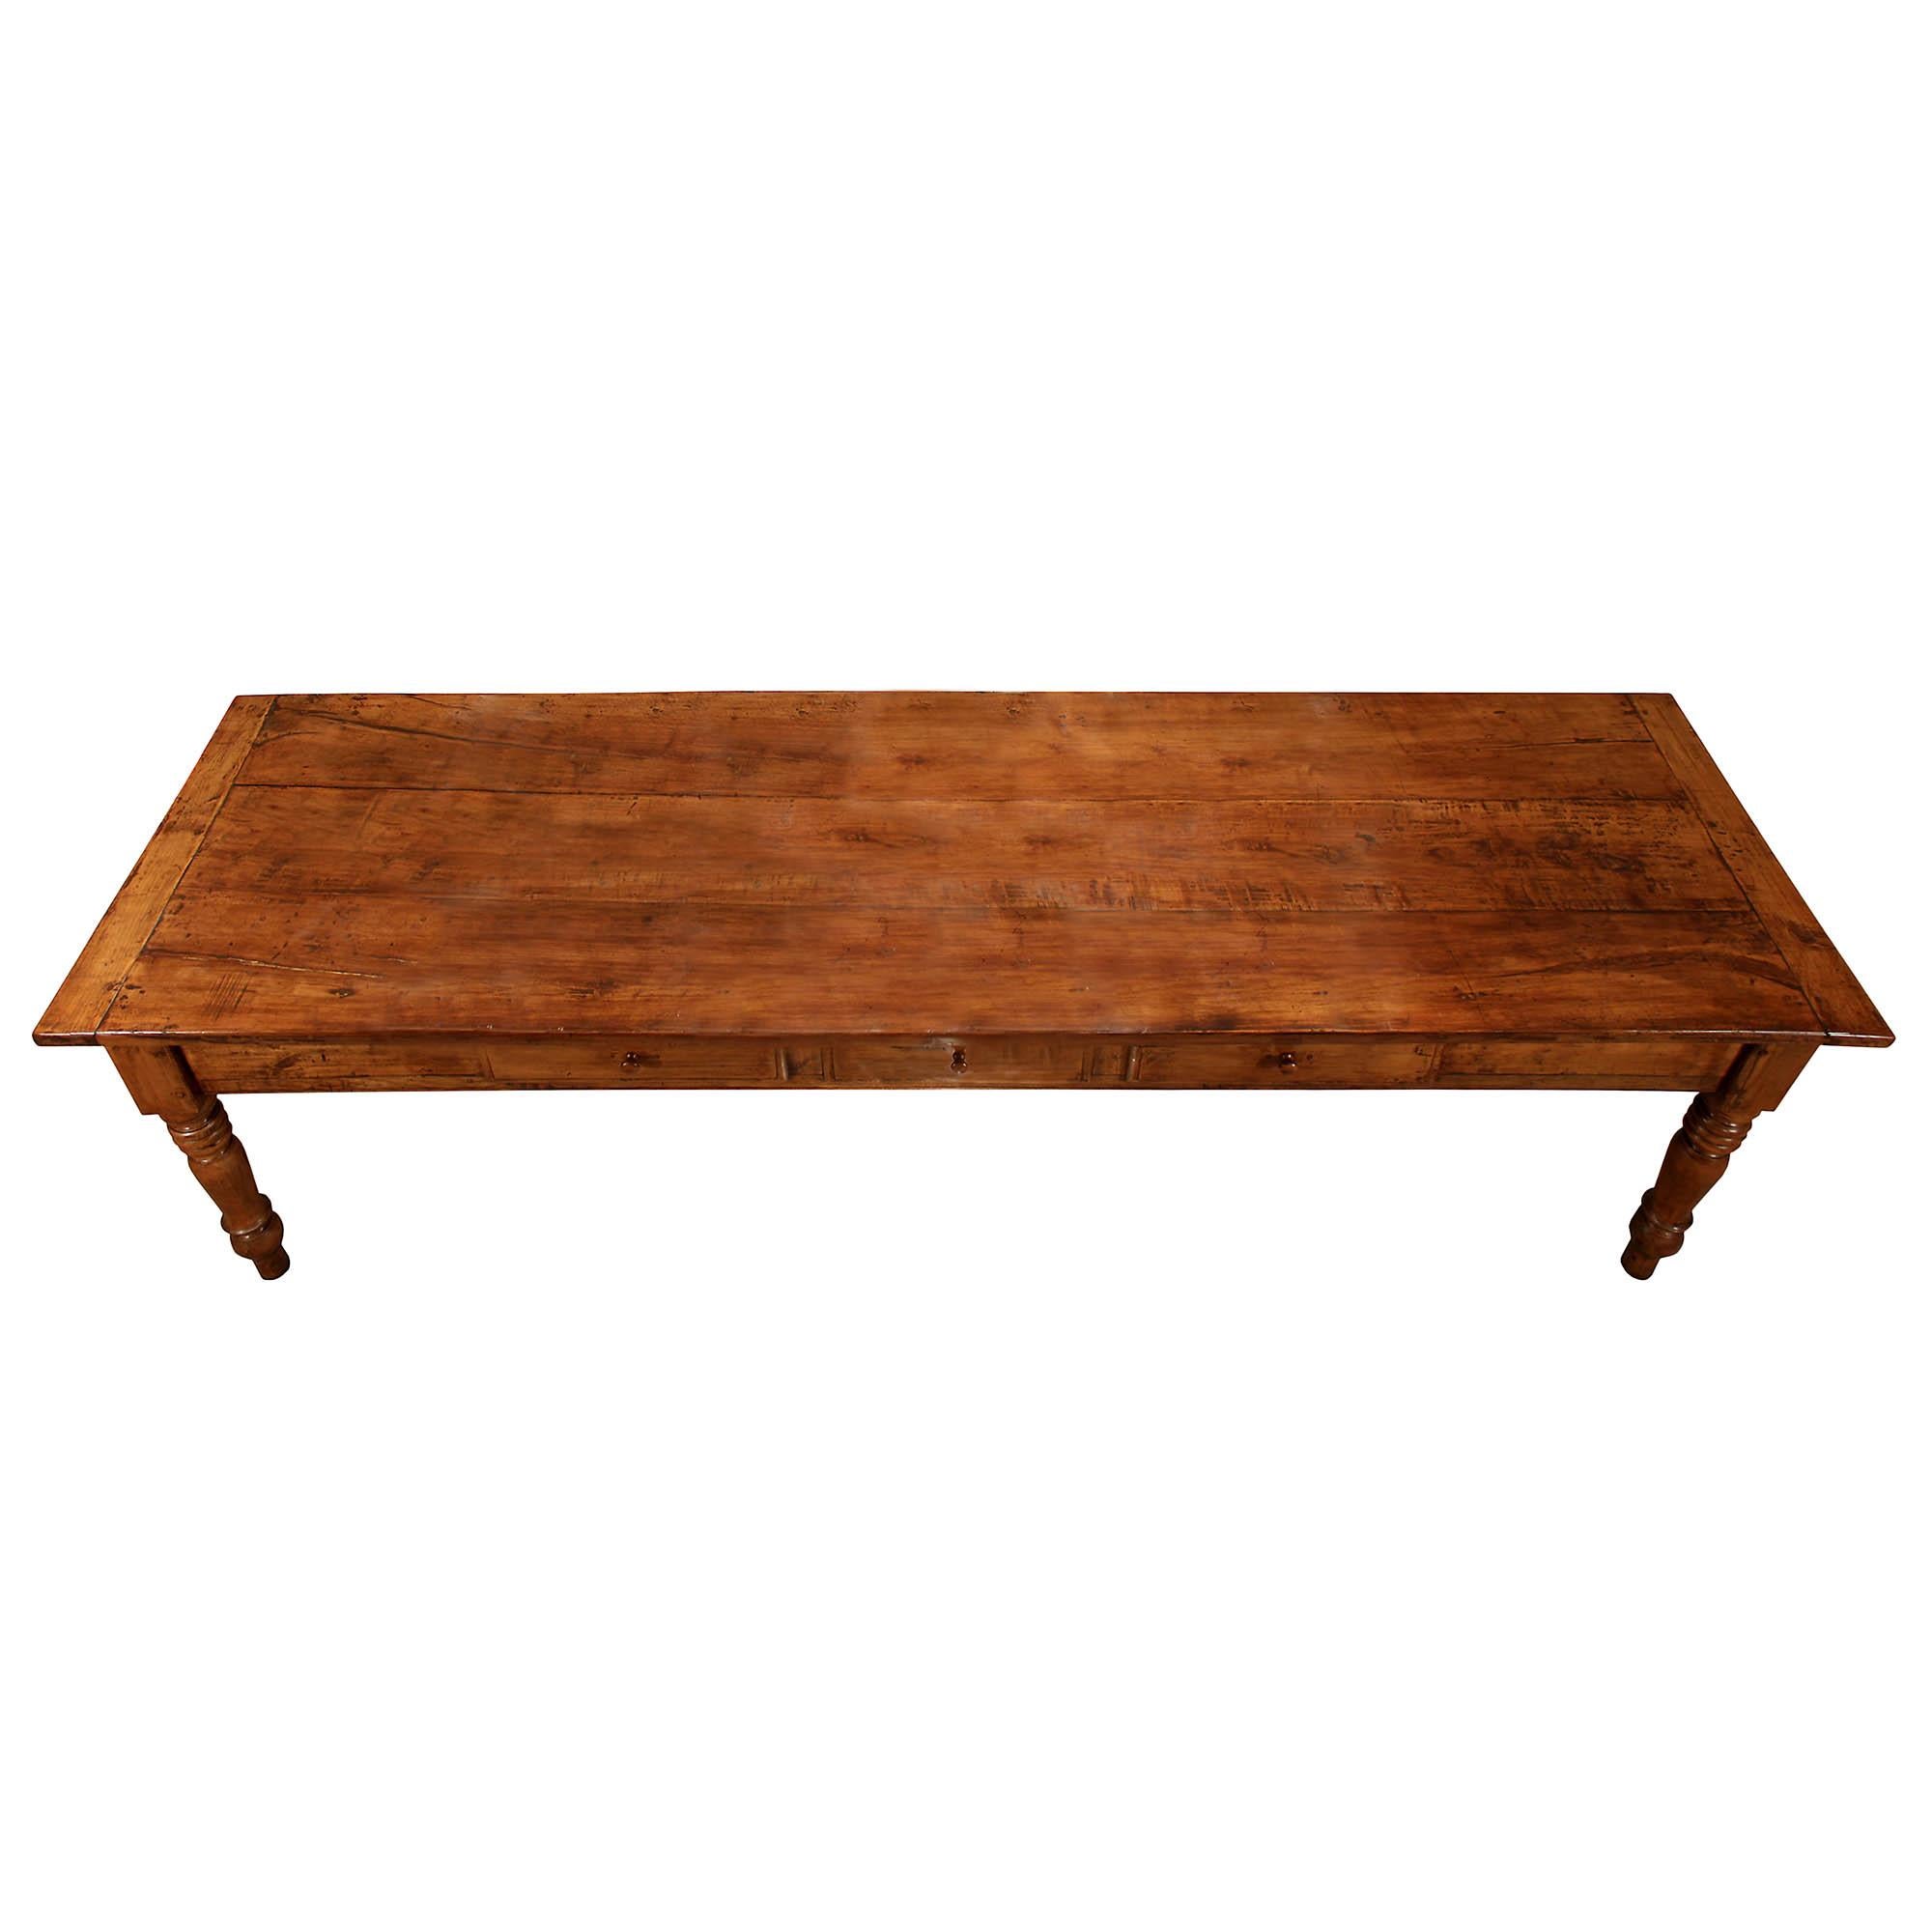 A very handsome and large scale Italian 18th century walnut country table. The table is raised on turned carved legs. At the straight frieze are three paneled drawers with walnut pulls. Above lays the walnut wonderful grain top. All original warm